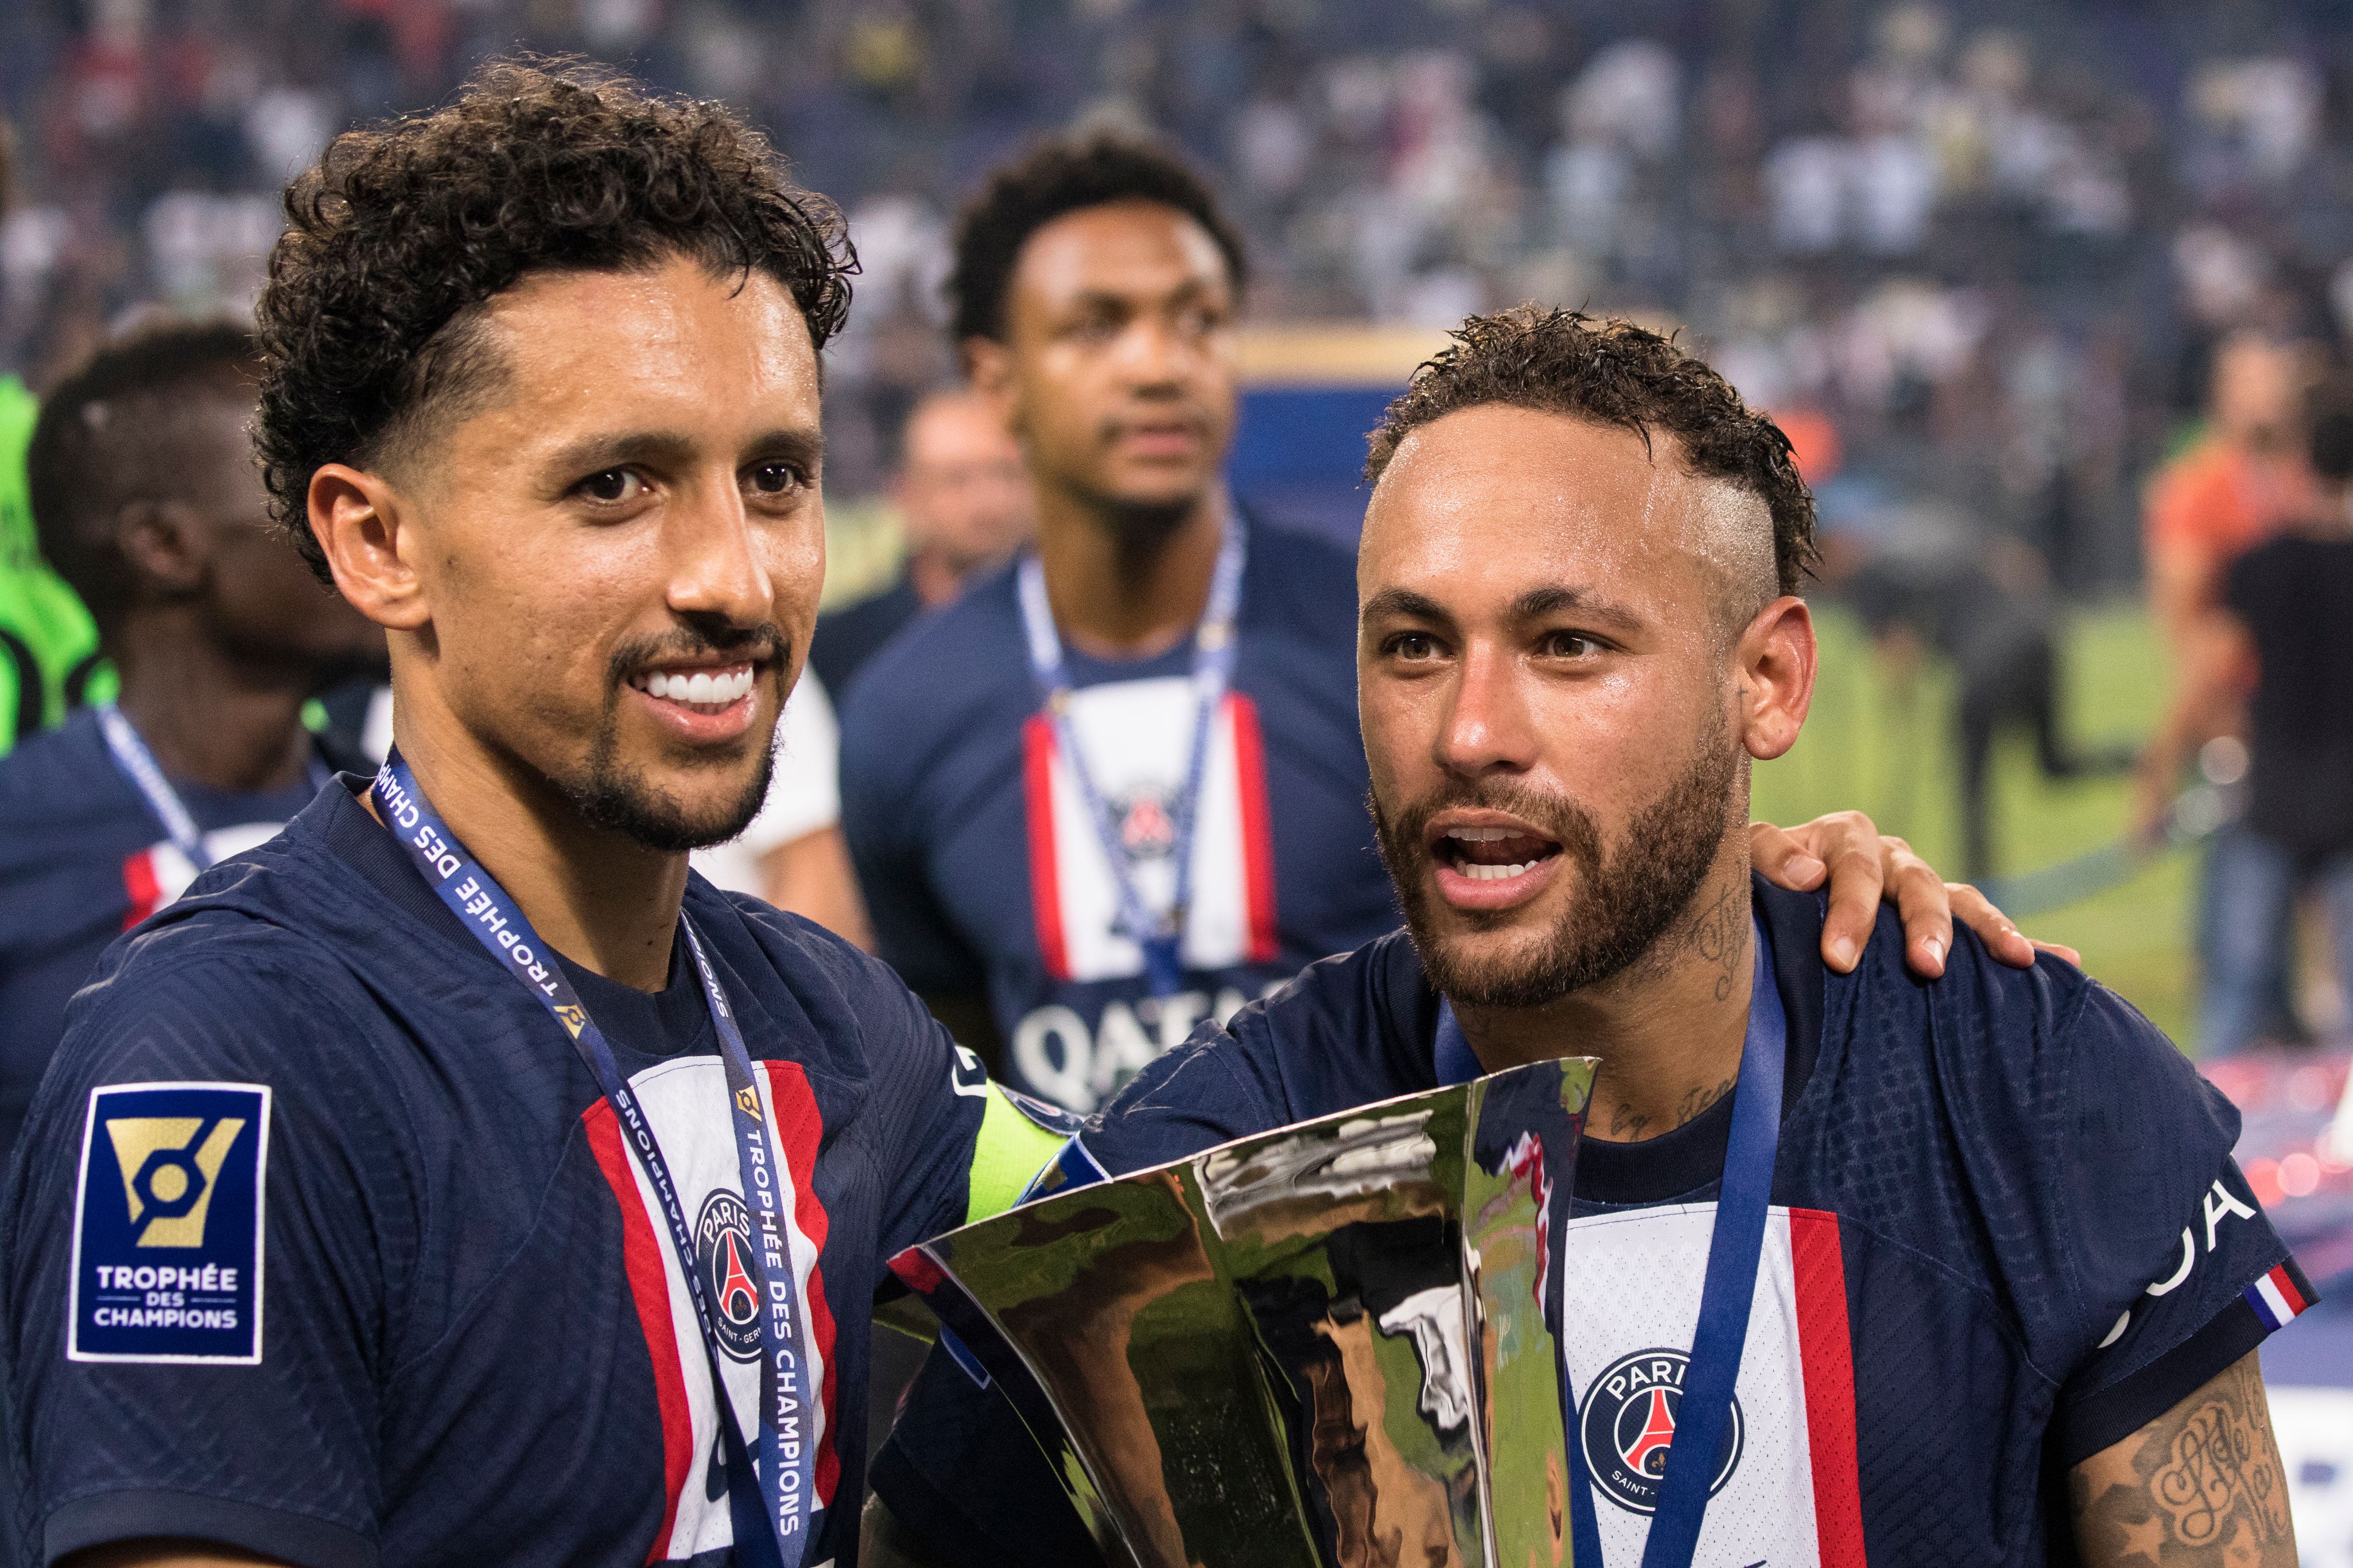 Paris Saint-Germain's Jr Neymar and Marquinhos celebrate with the trophy after winning the Champion's Trophy match